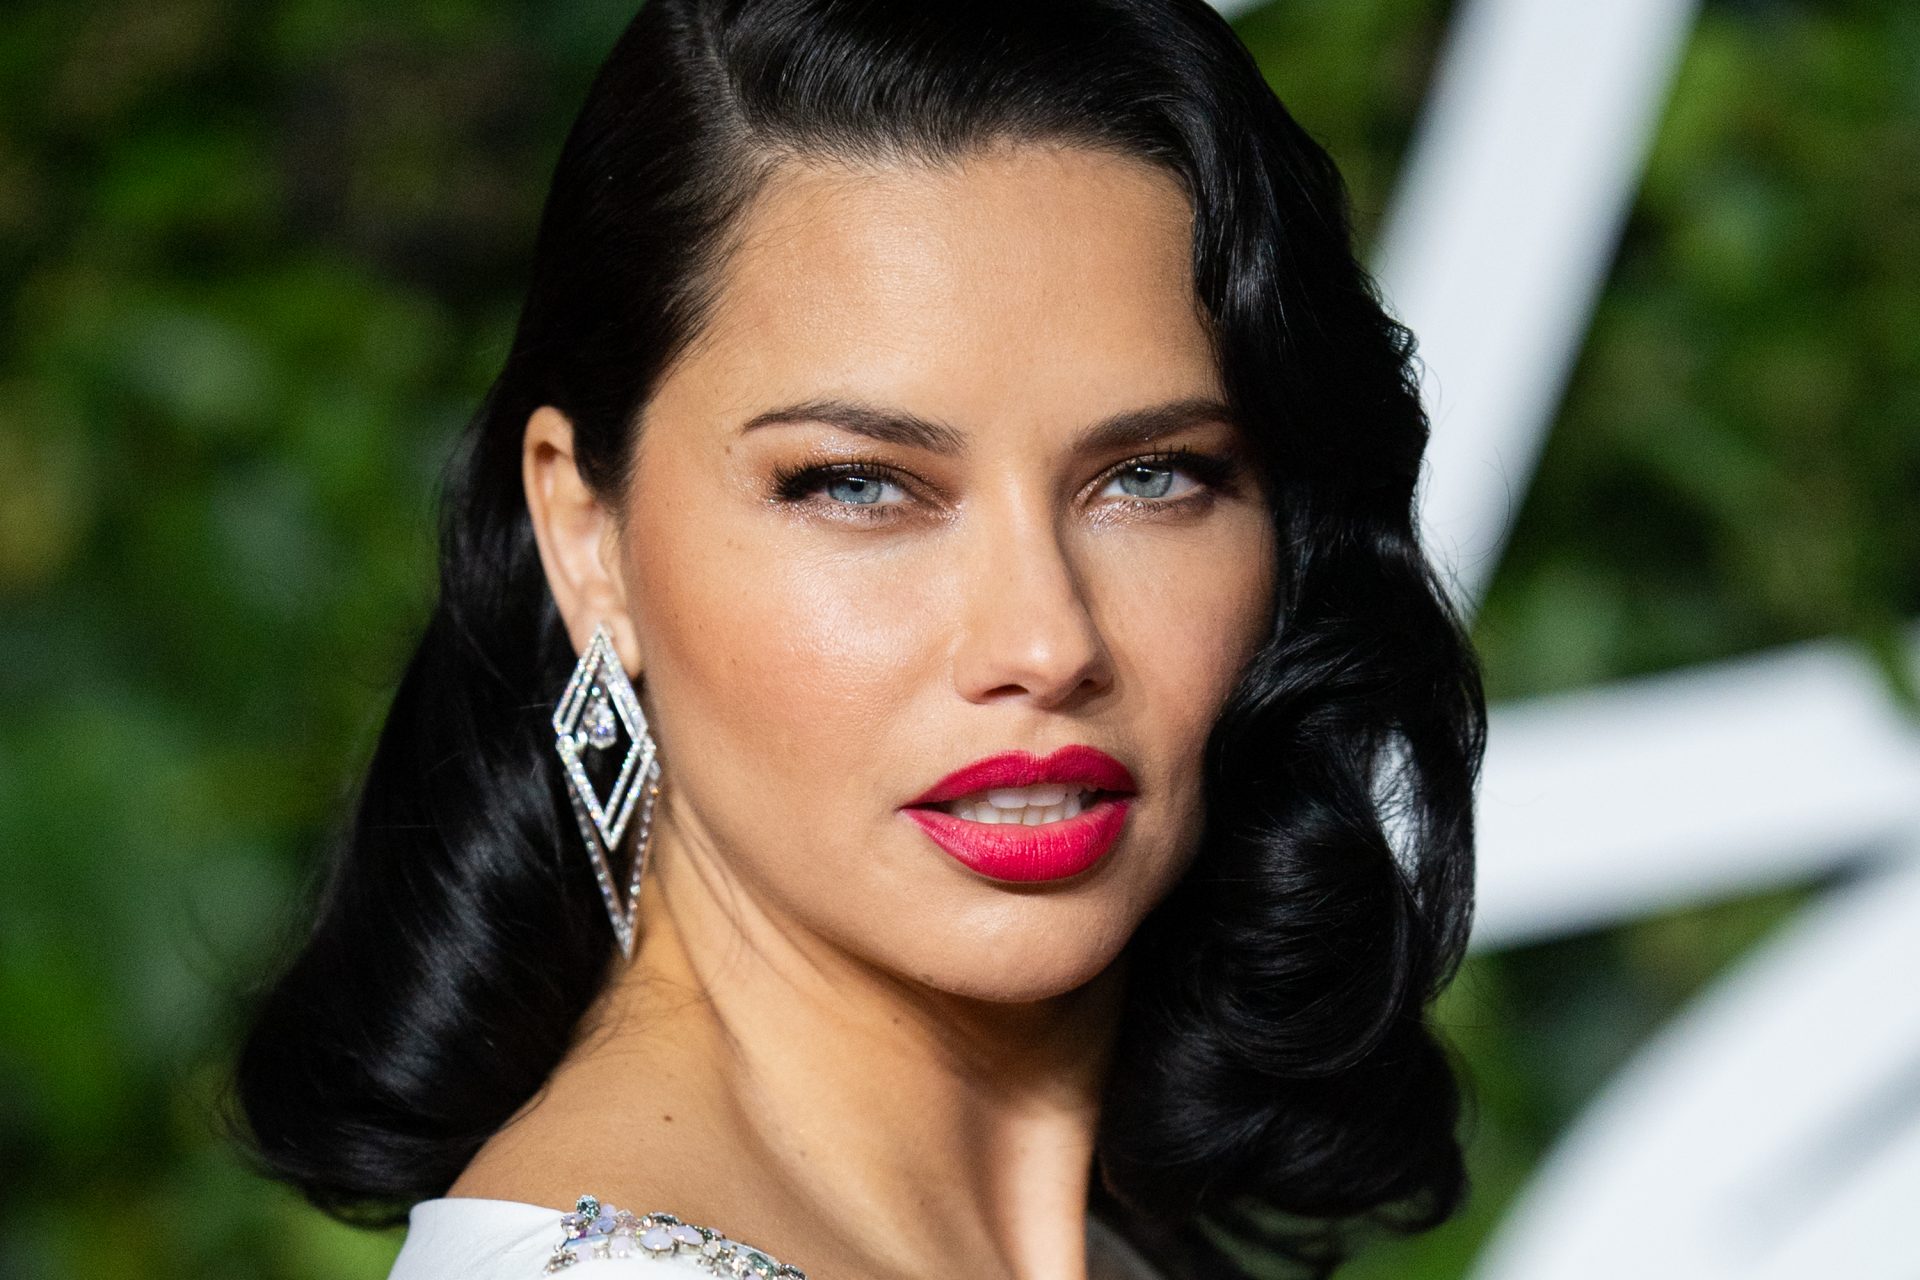 <p>Approaching the pinnacle of 2024's highest-paid models, we find Adriana Lima, born in 1981 in Brazil. She became an international fashion icon starting in the late '90s.</p> <p>Net worth: $95 million</p>